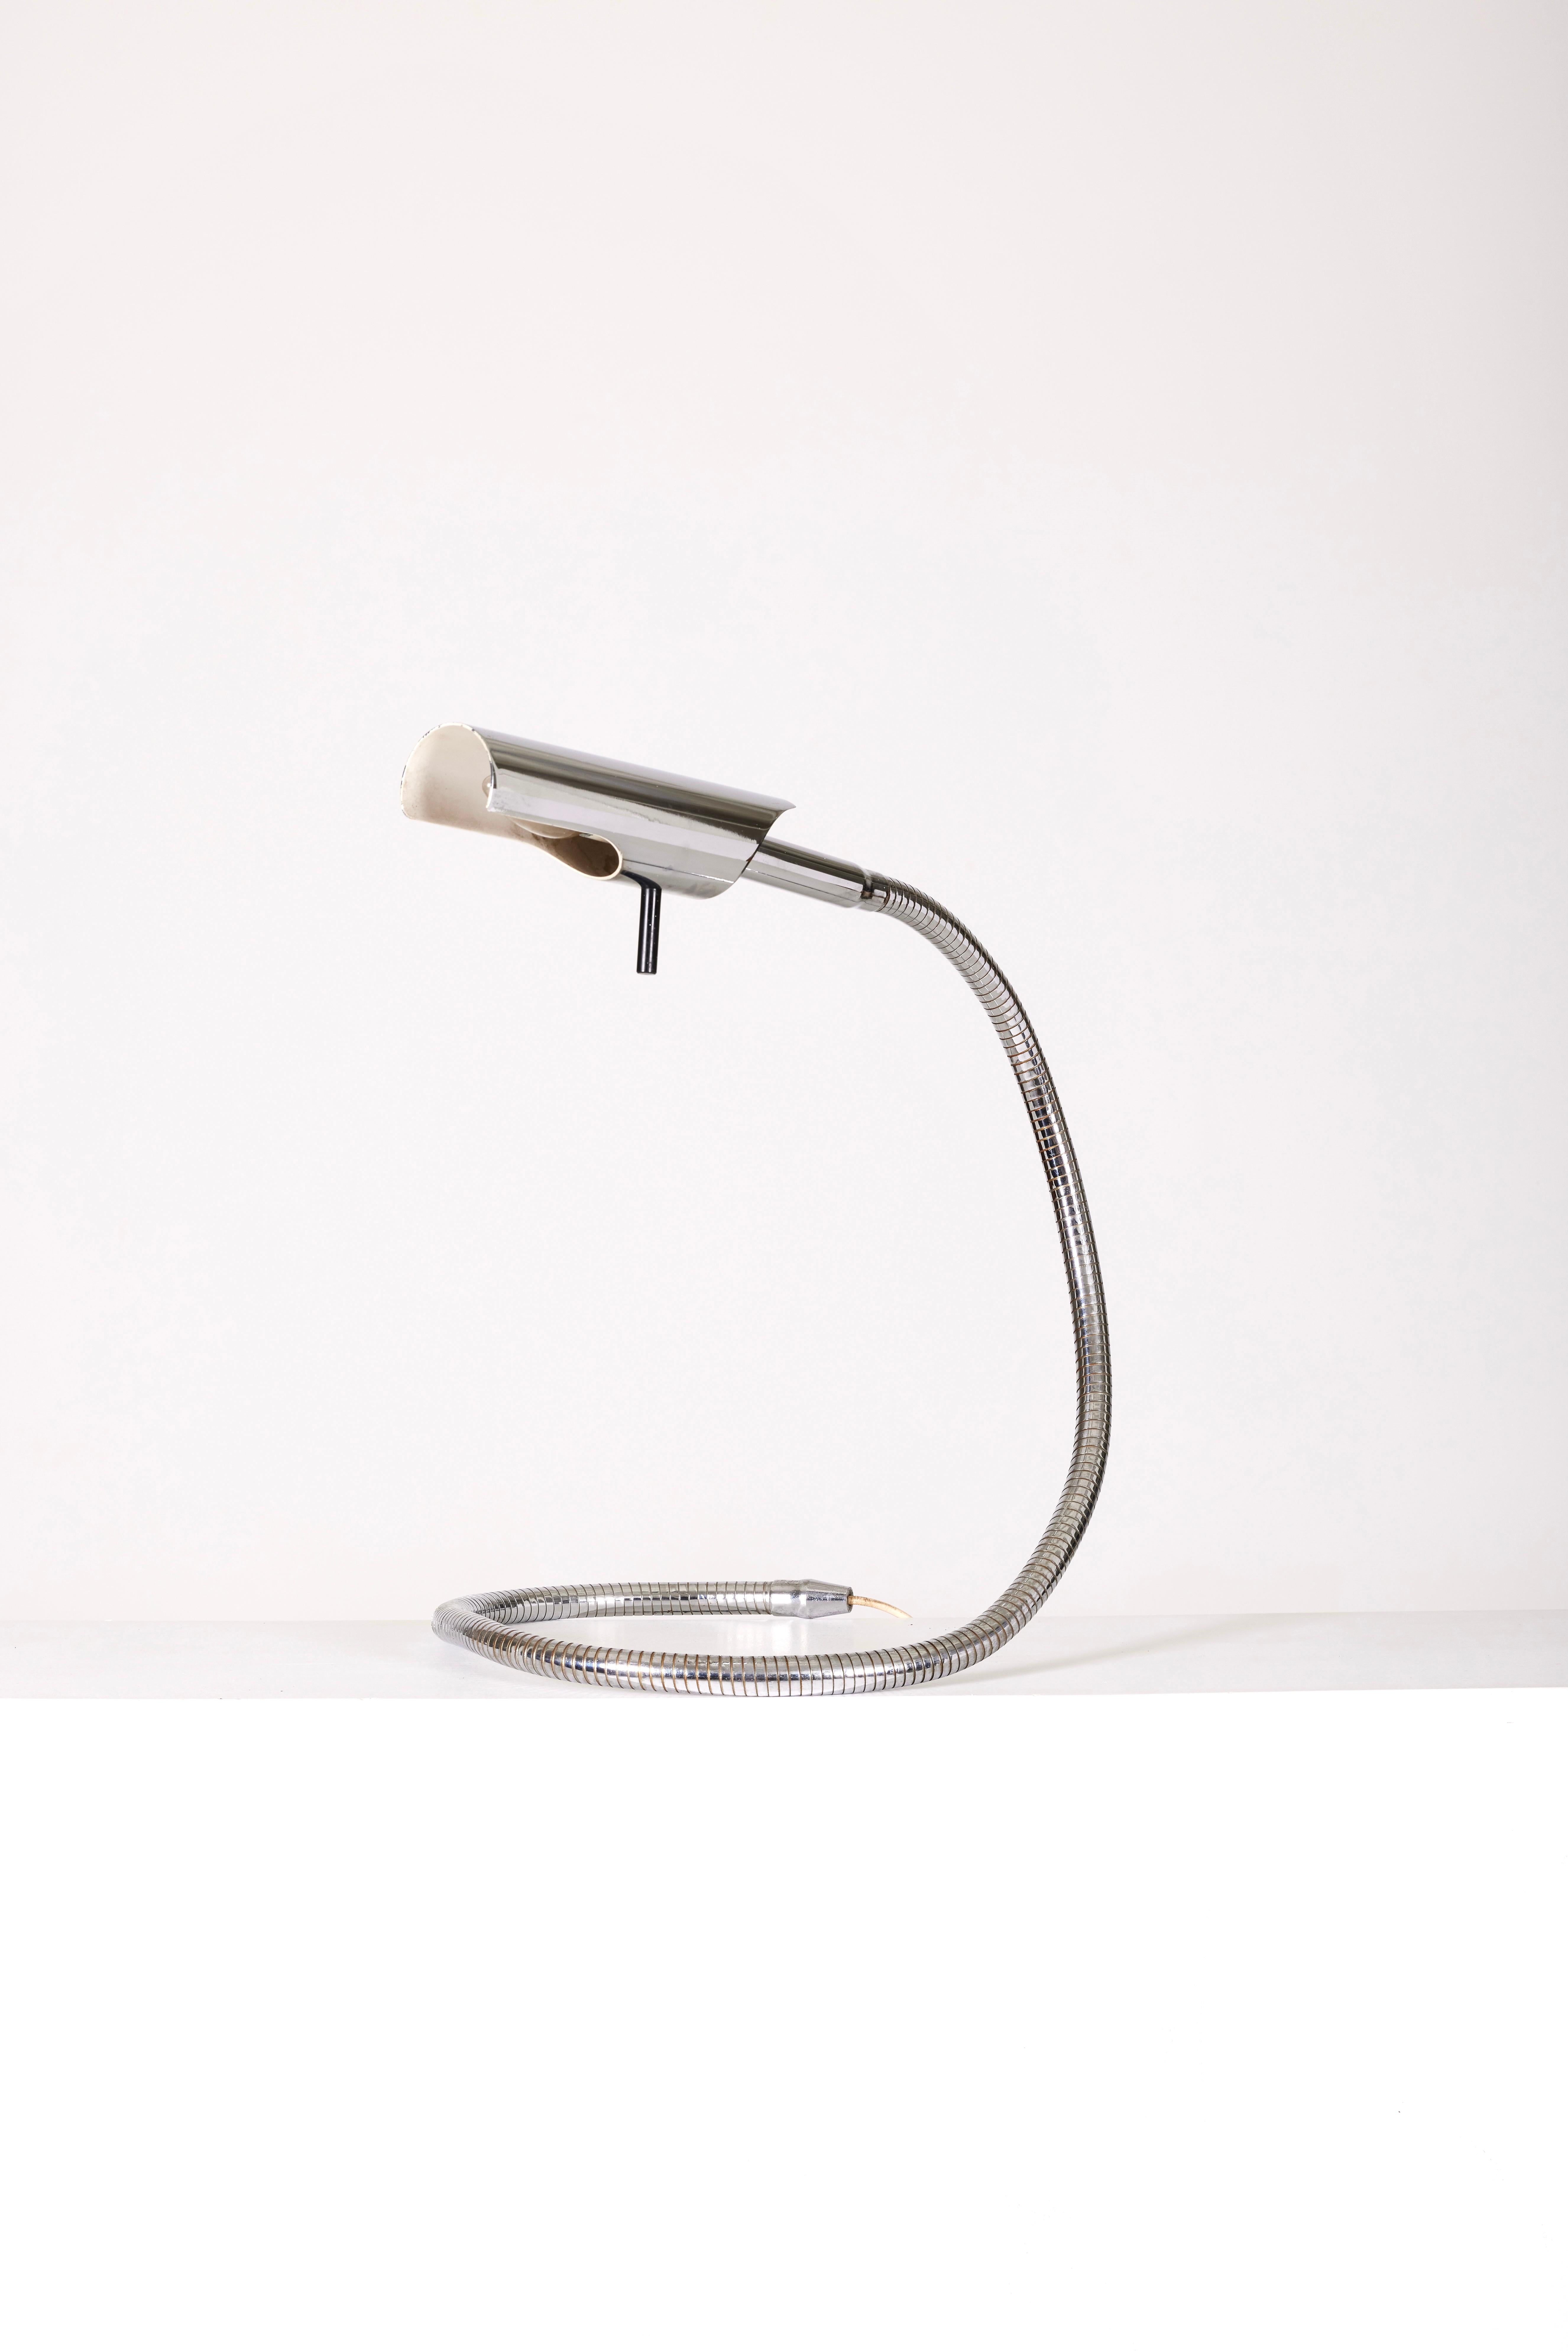 Desk lamp model F233 by designer Etienne Fermigier for Les Monix, 1970s. Table lamp in chrome-plated metal, with slight signs of wear to note.
LP1269